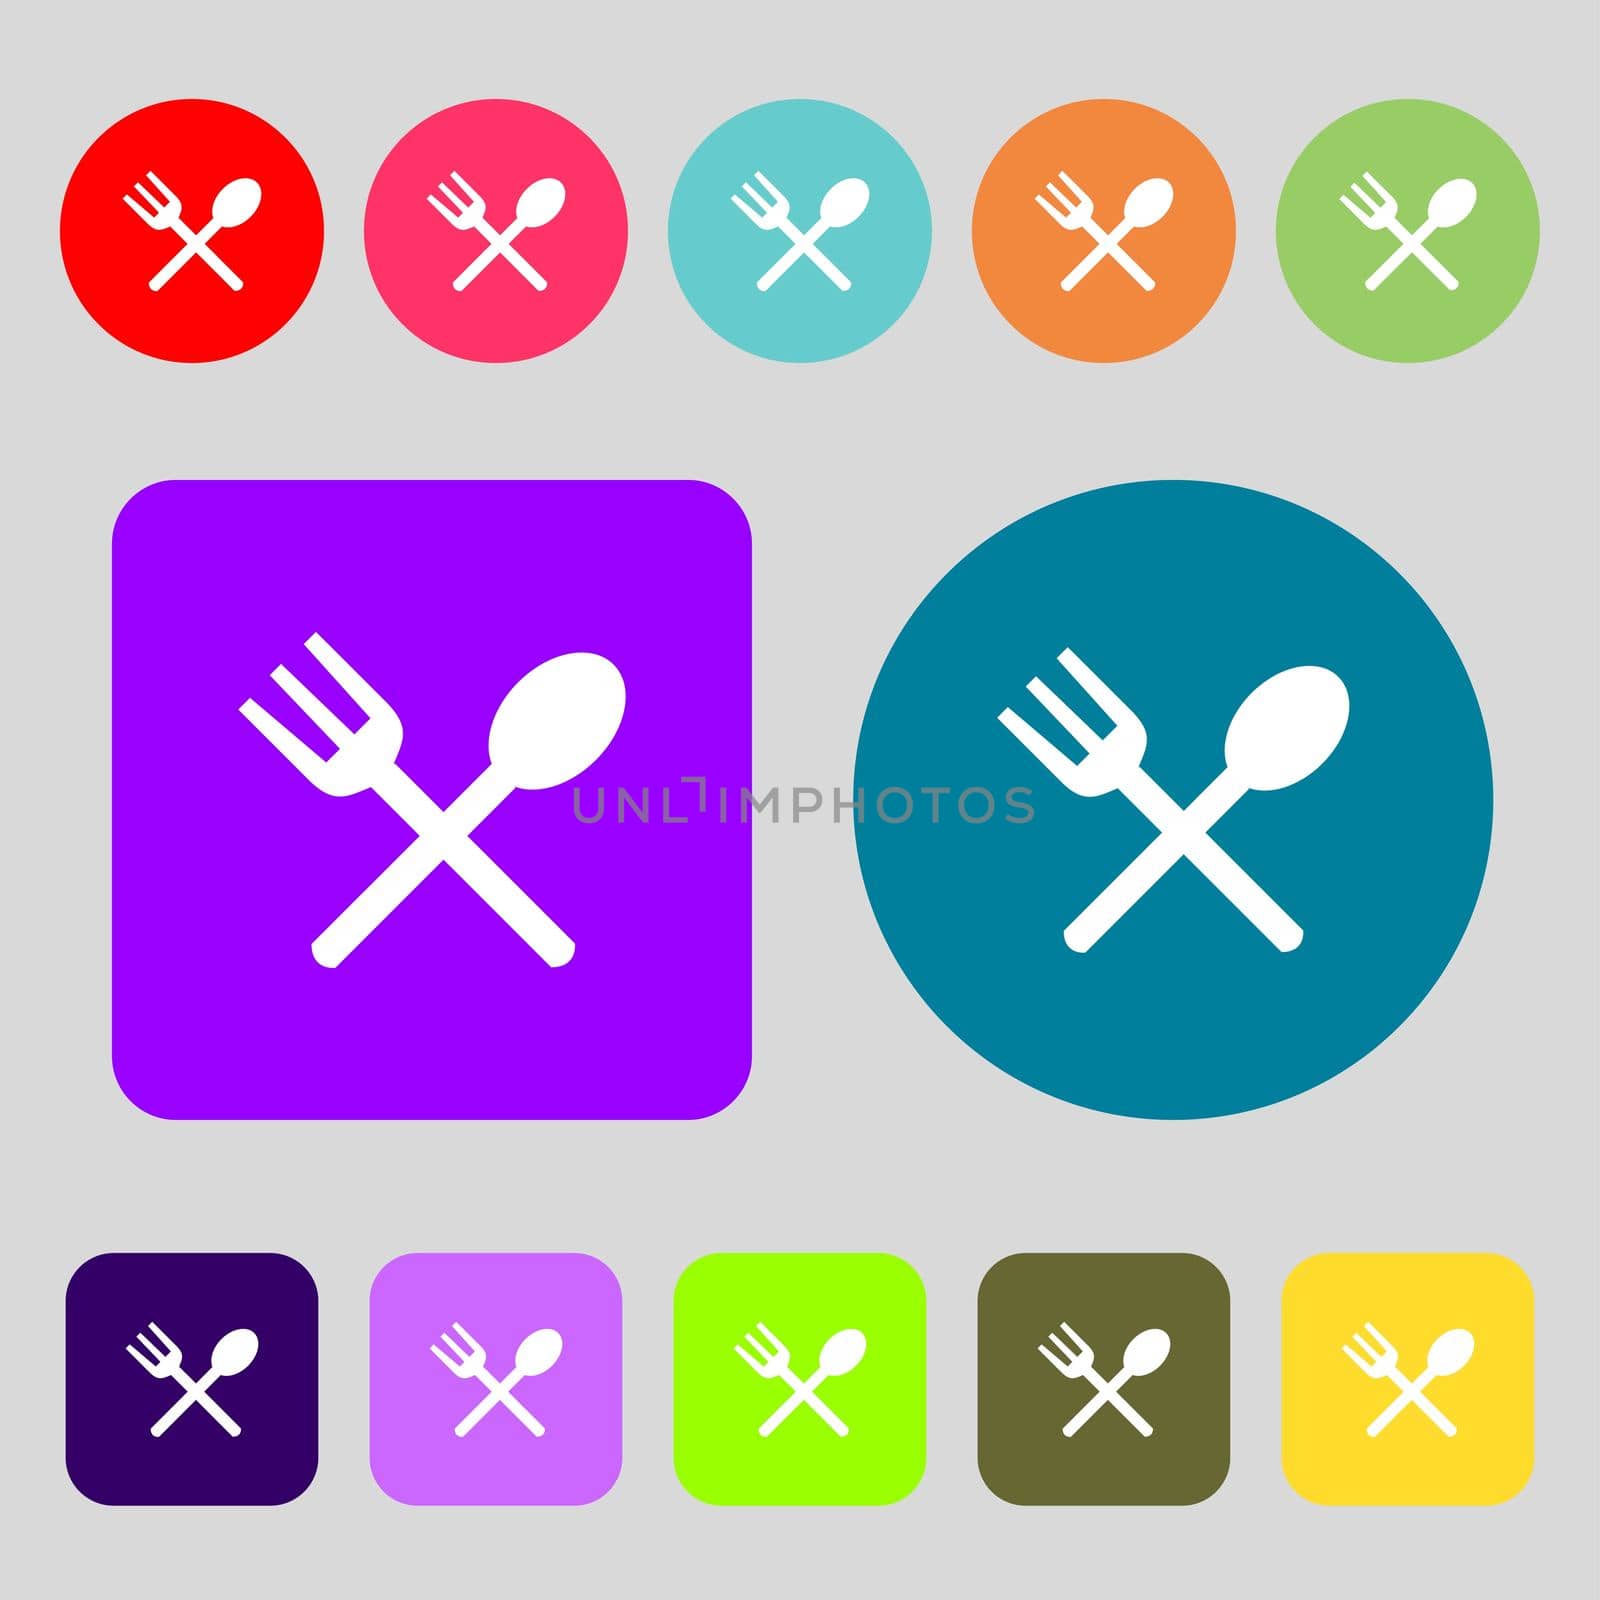 Fork and spoon crosswise, Cutlery, Eat icon sign. 12 colored buttons. Flat design.  by serhii_lohvyniuk